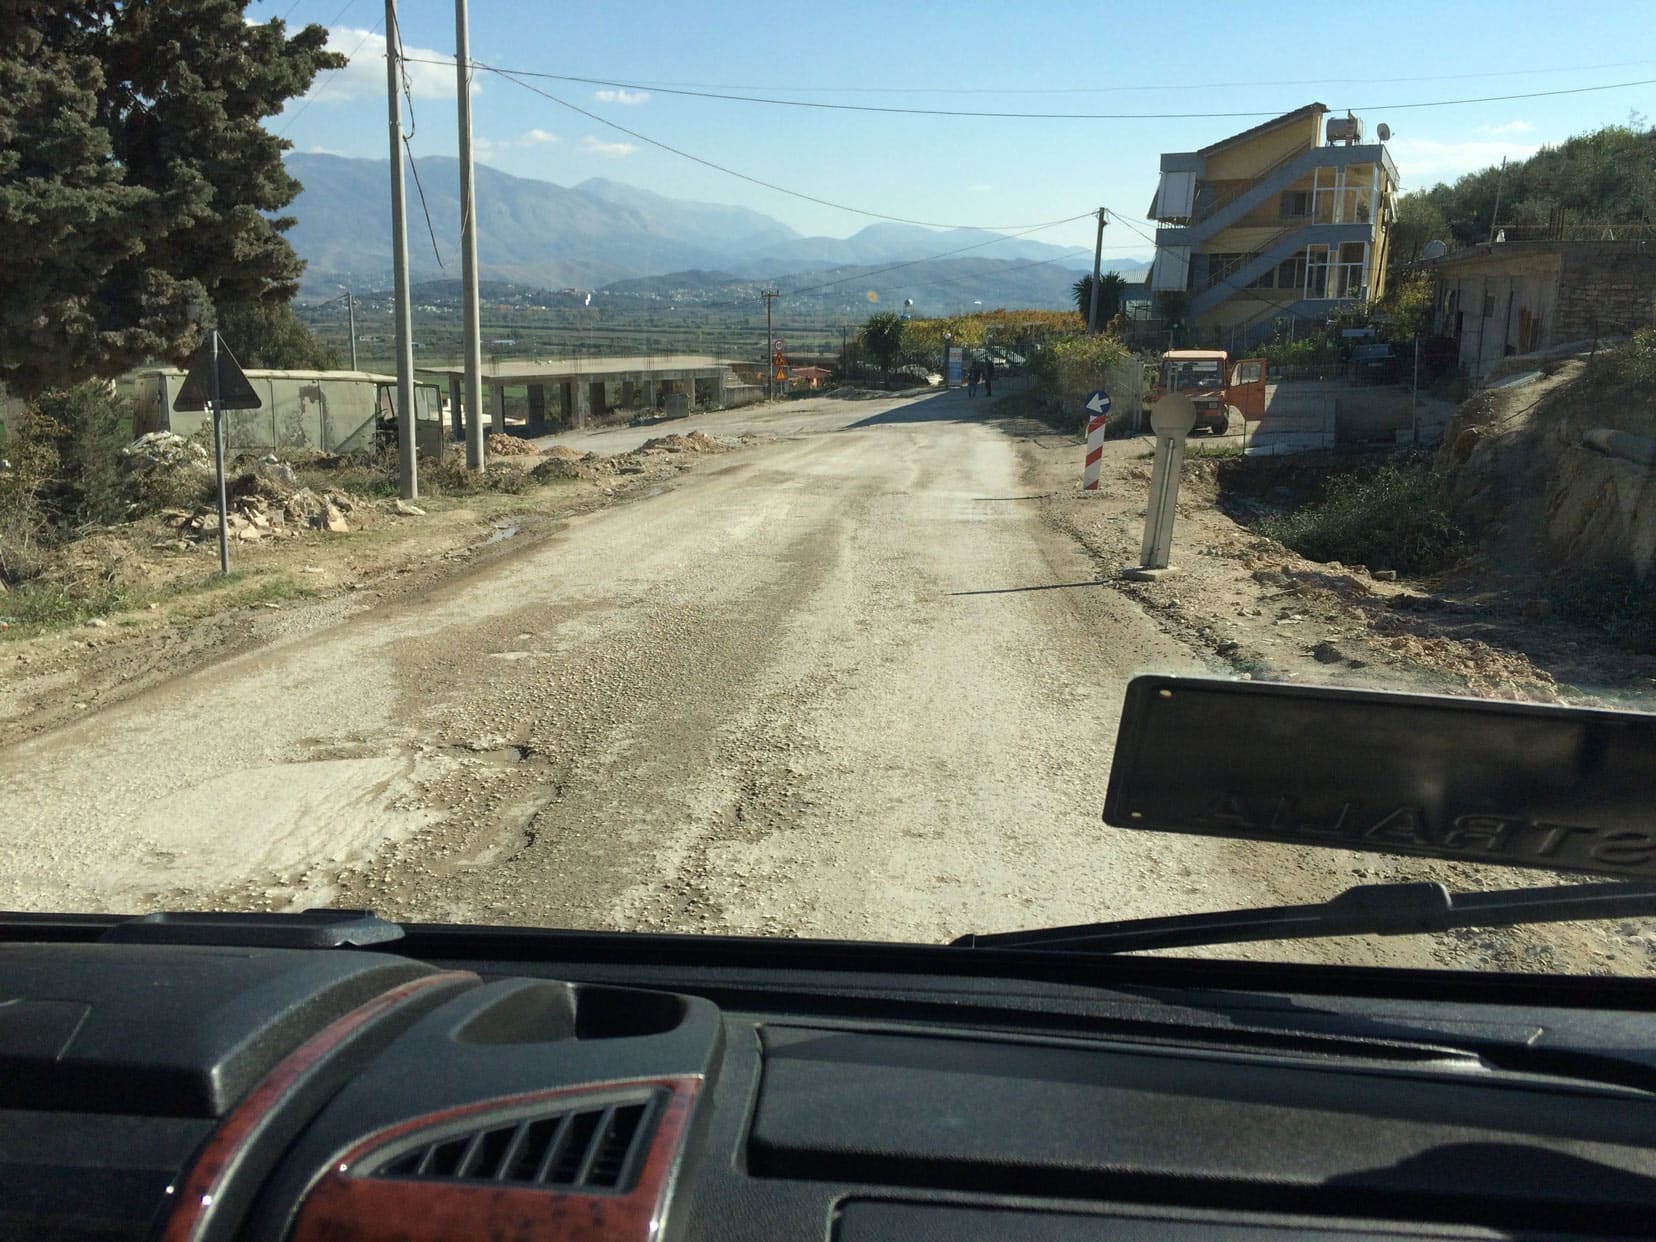 Pot holes in an Albanian road 